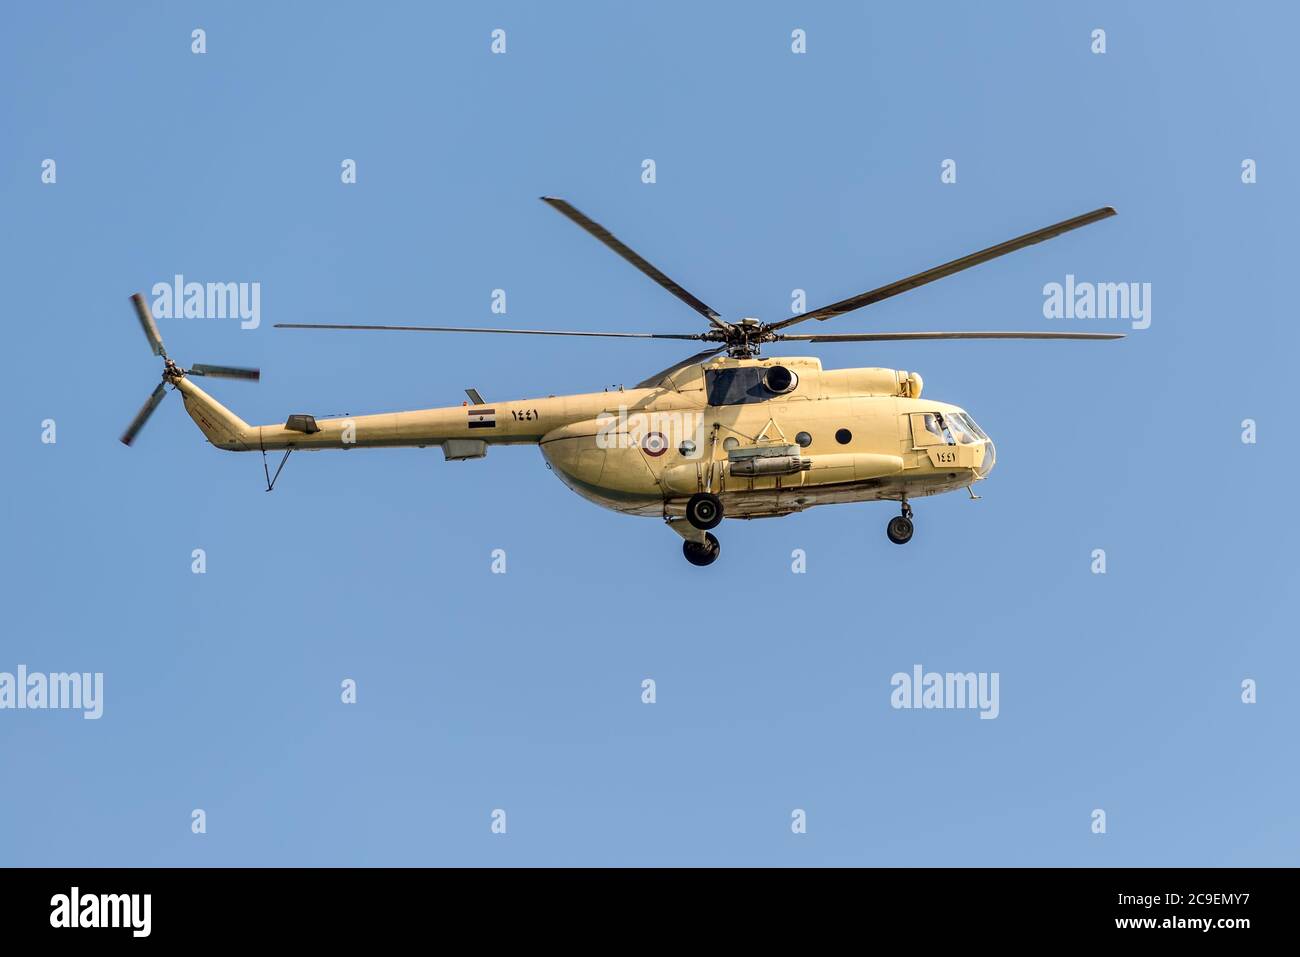 Ismailia, Egypt - November 5, 2017: A Mil Mi-8 Hip helicopter patrolling the Suez Canal in Egypt. Stock Photo